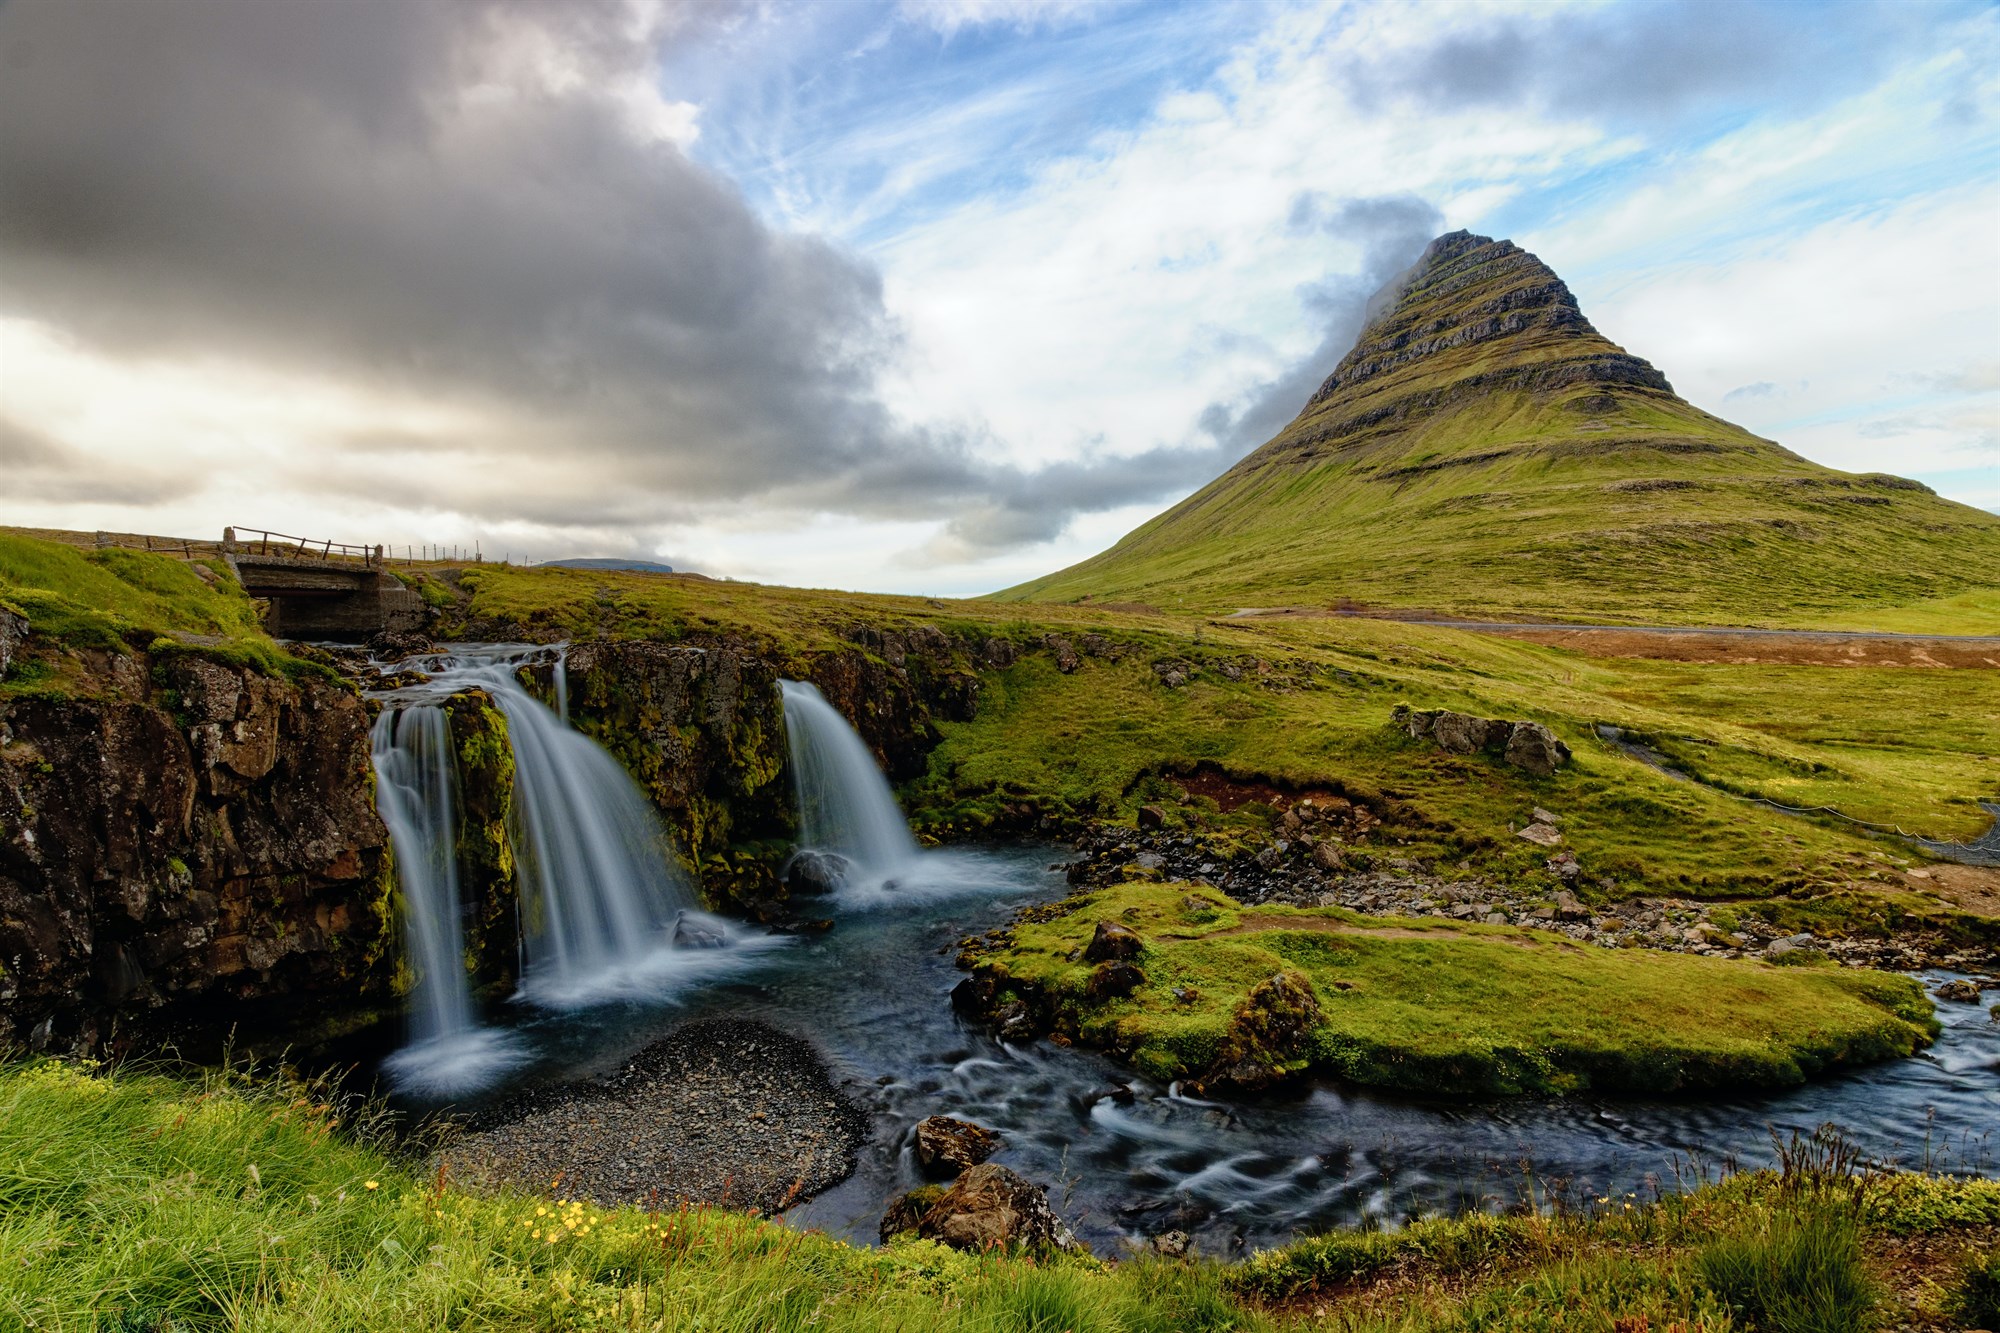 Kirkjufell mountain with small waterfalls nearby, Iceland.